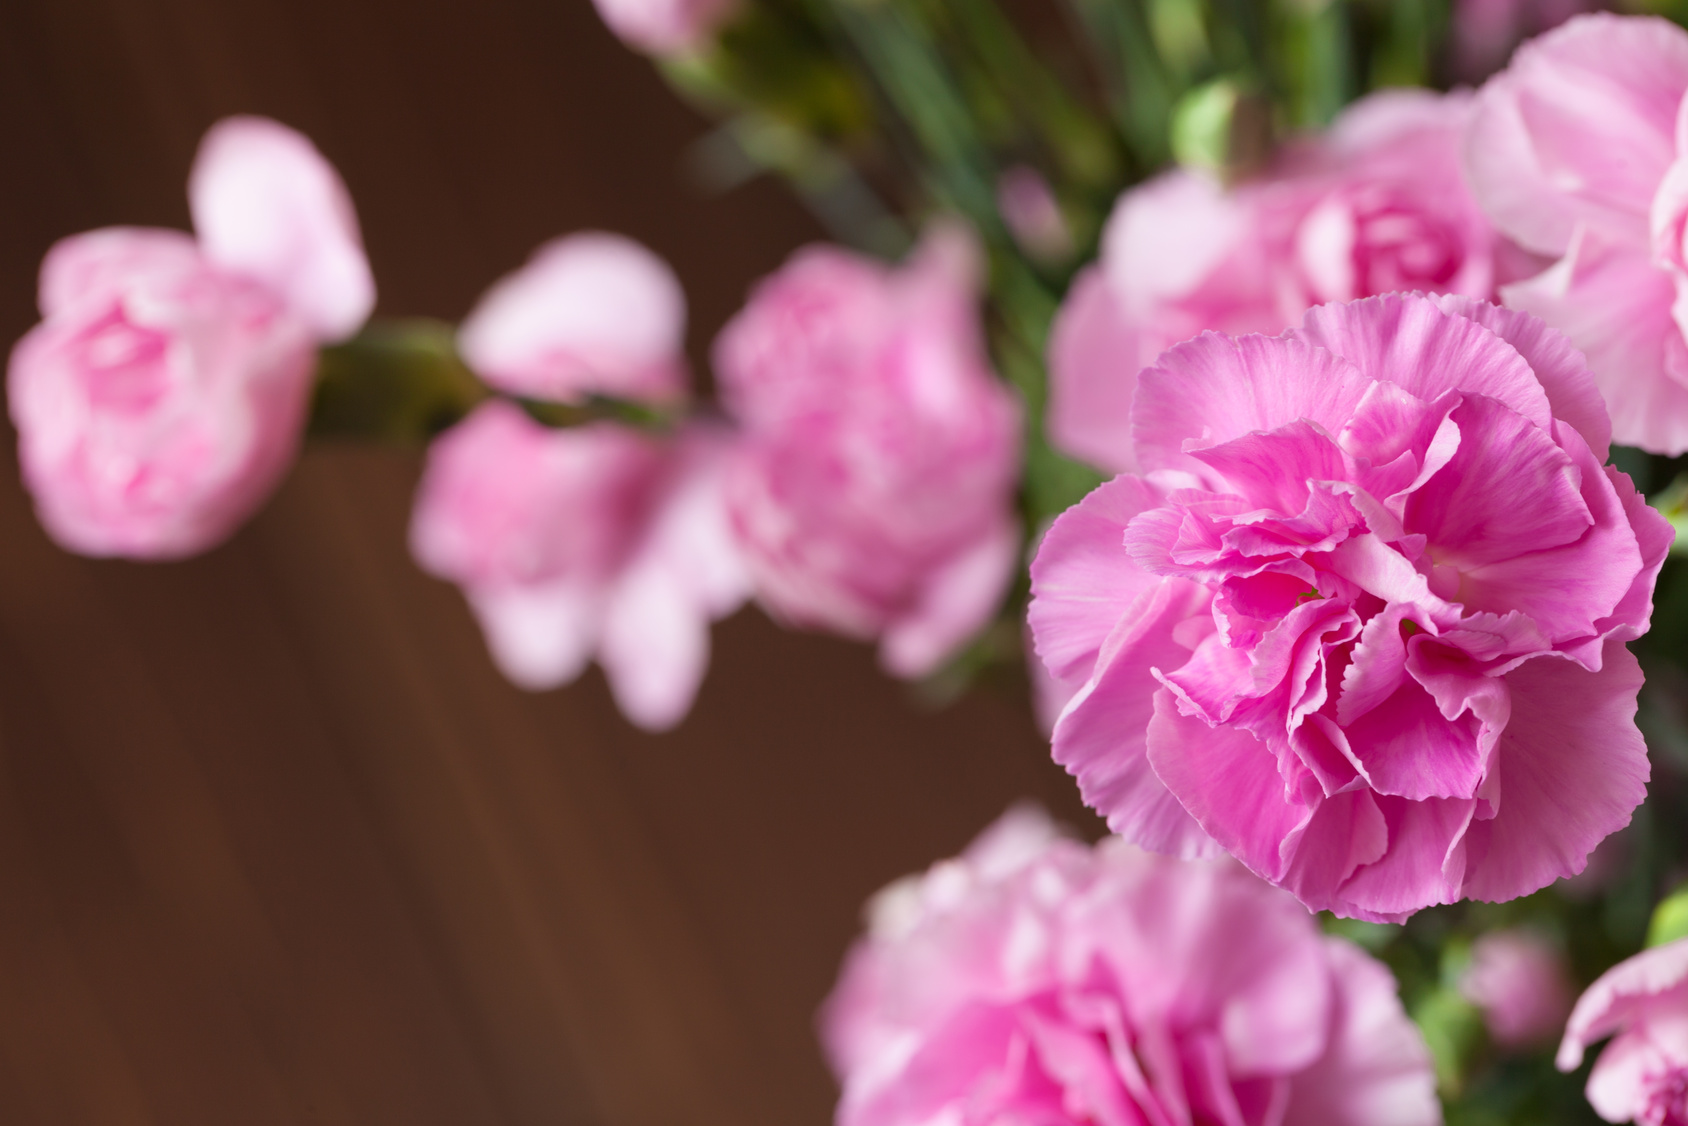 Pink carnations in the vase on the wooden table